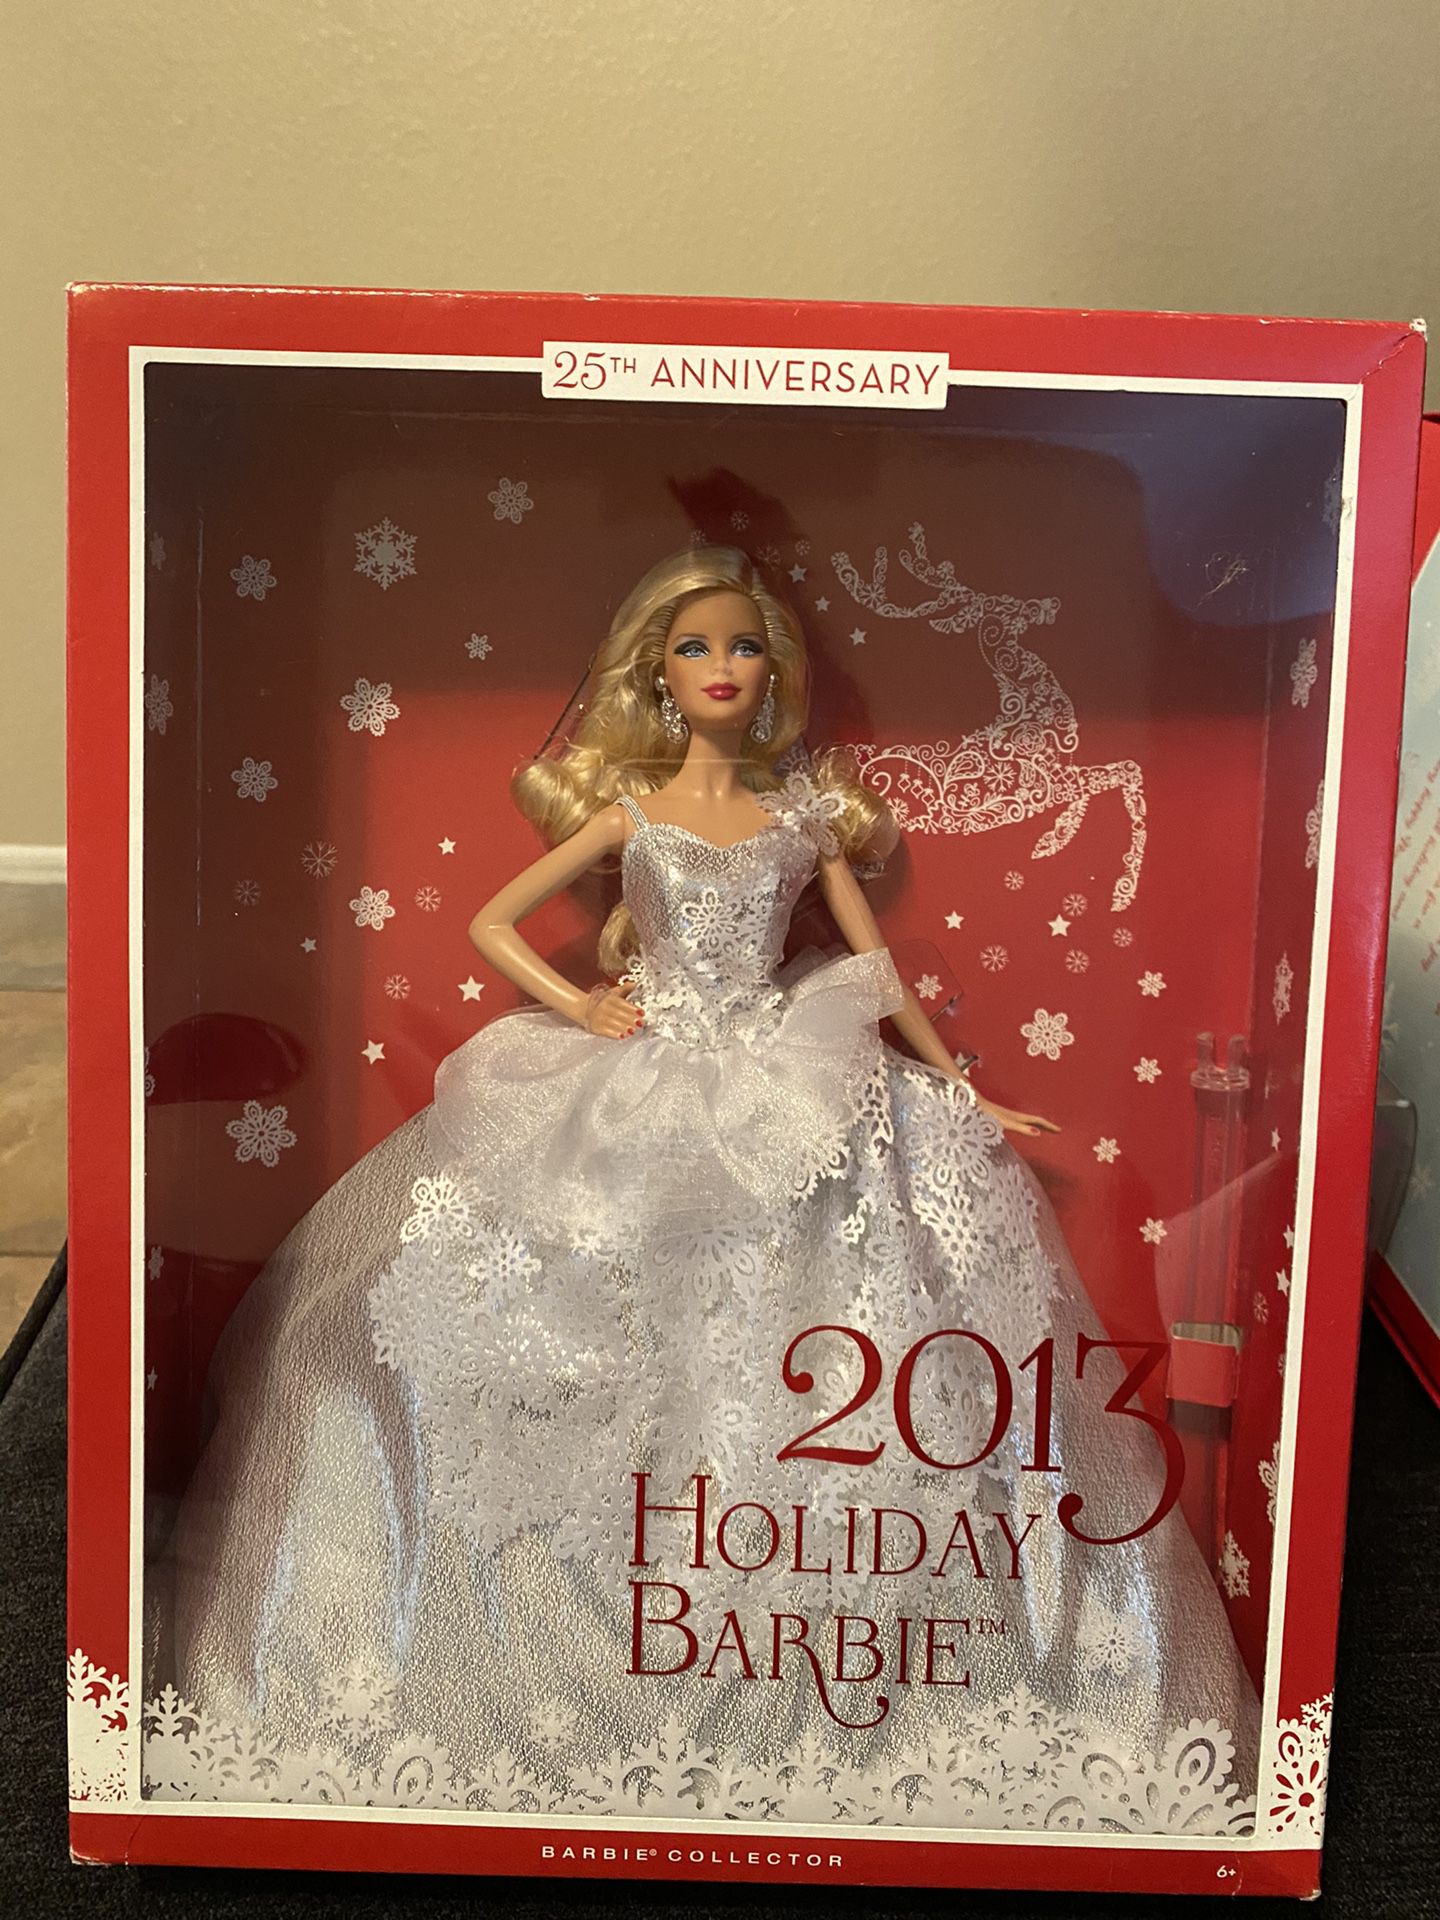 2013 Holiday Barbie (25th Anniversary)